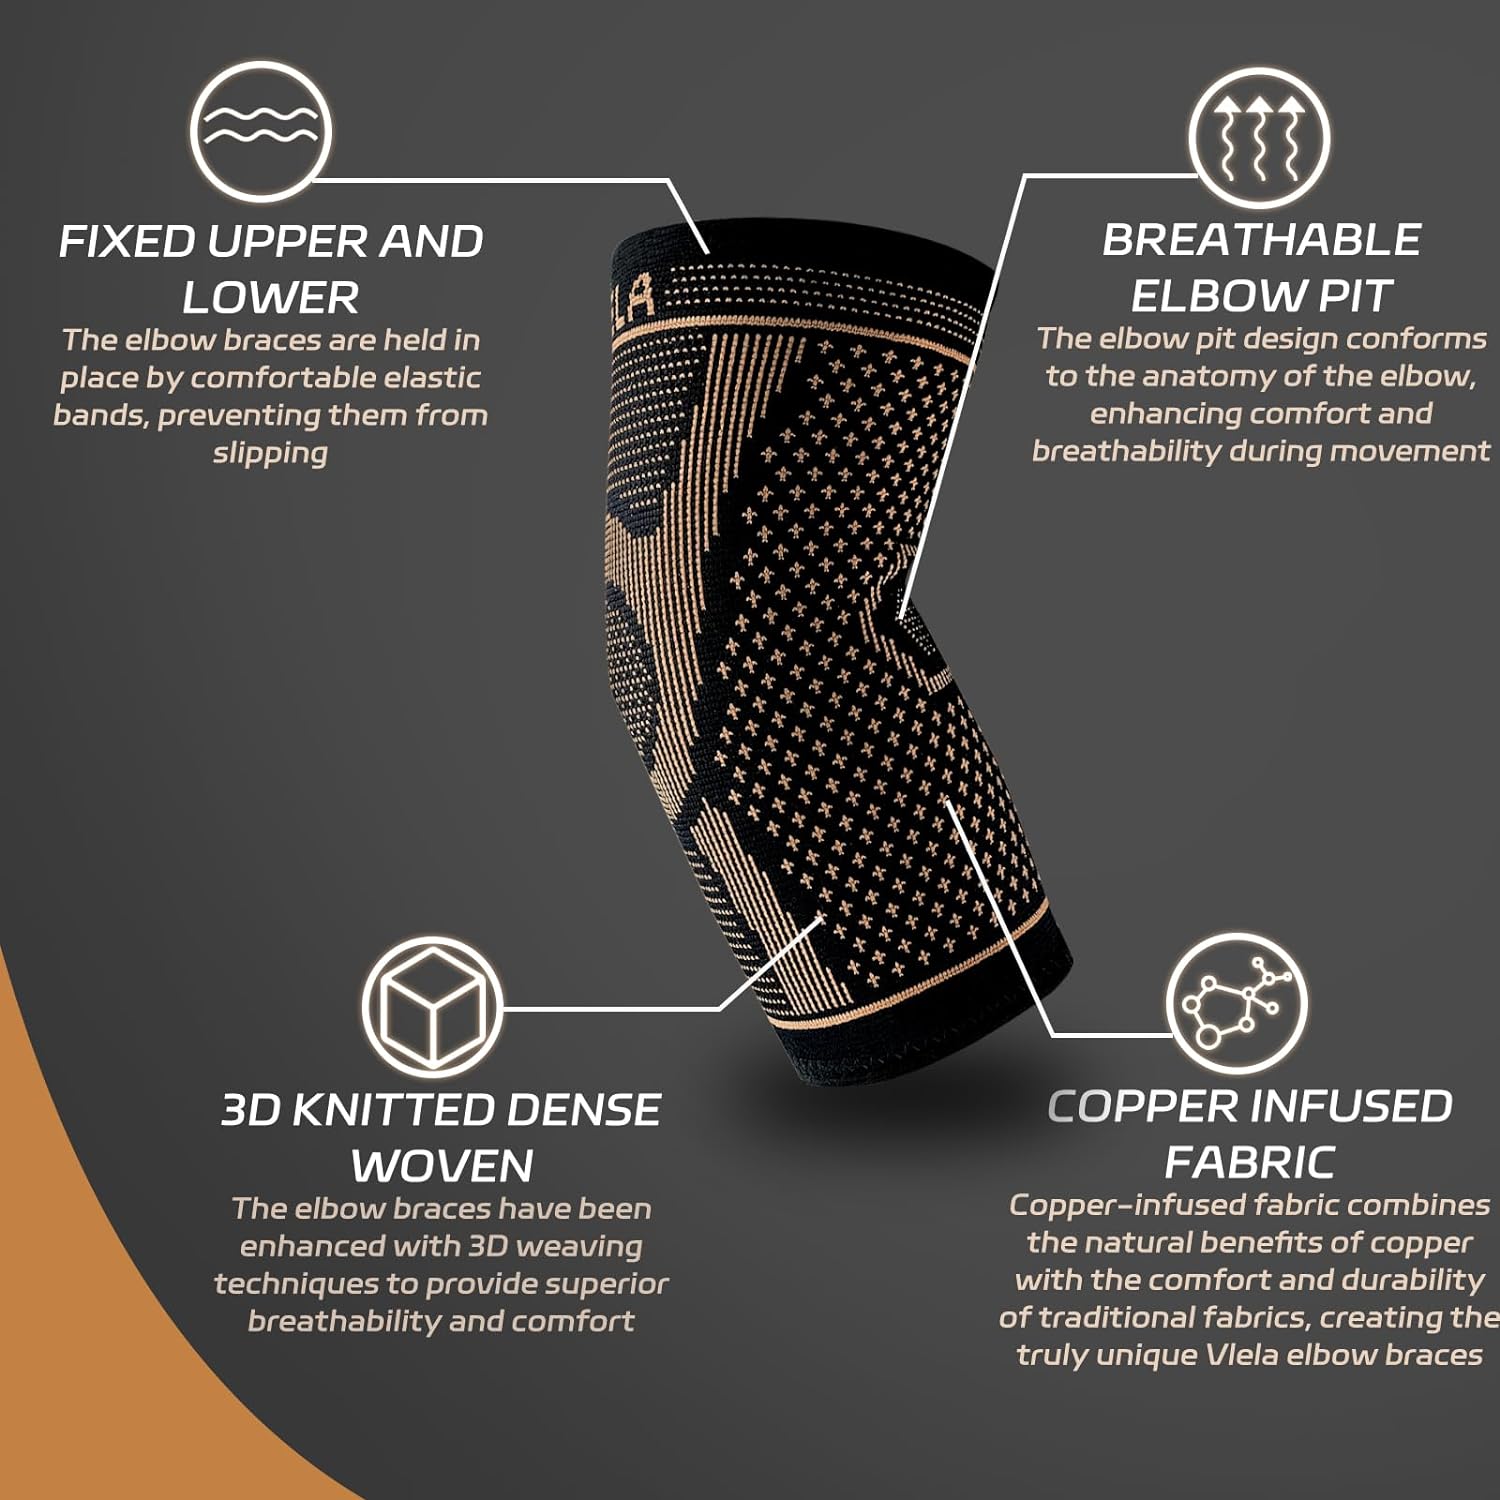 Copper Elbow Sleeve,Elbow Compression Sleeve, Elbow Brace For Tendonitis and Tennis Elbow,Golfers, Arthritis, Bursitis. Elbow Pain Relief,Weightlifting, Fit for Men  Women